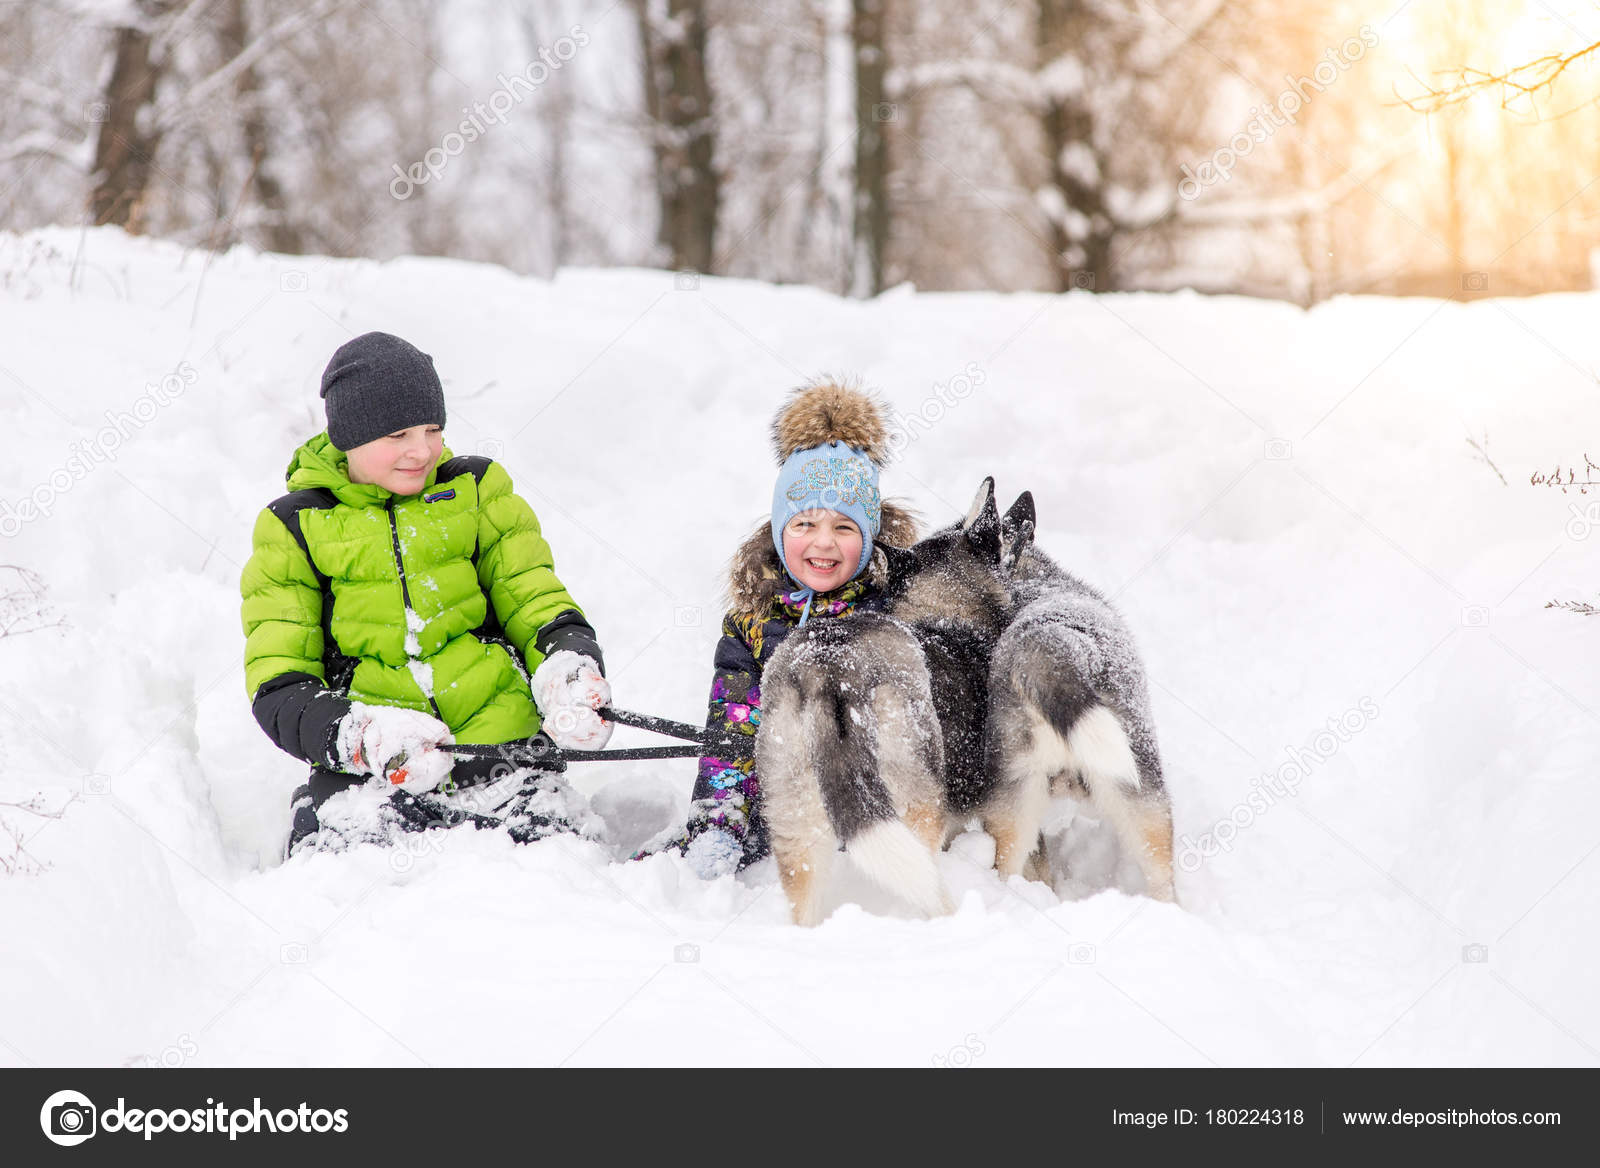 Children Brother And Sister Playing With The Husky Pups In The Park In The Winter In The Snow Stock Photo C Serg0403 180224318